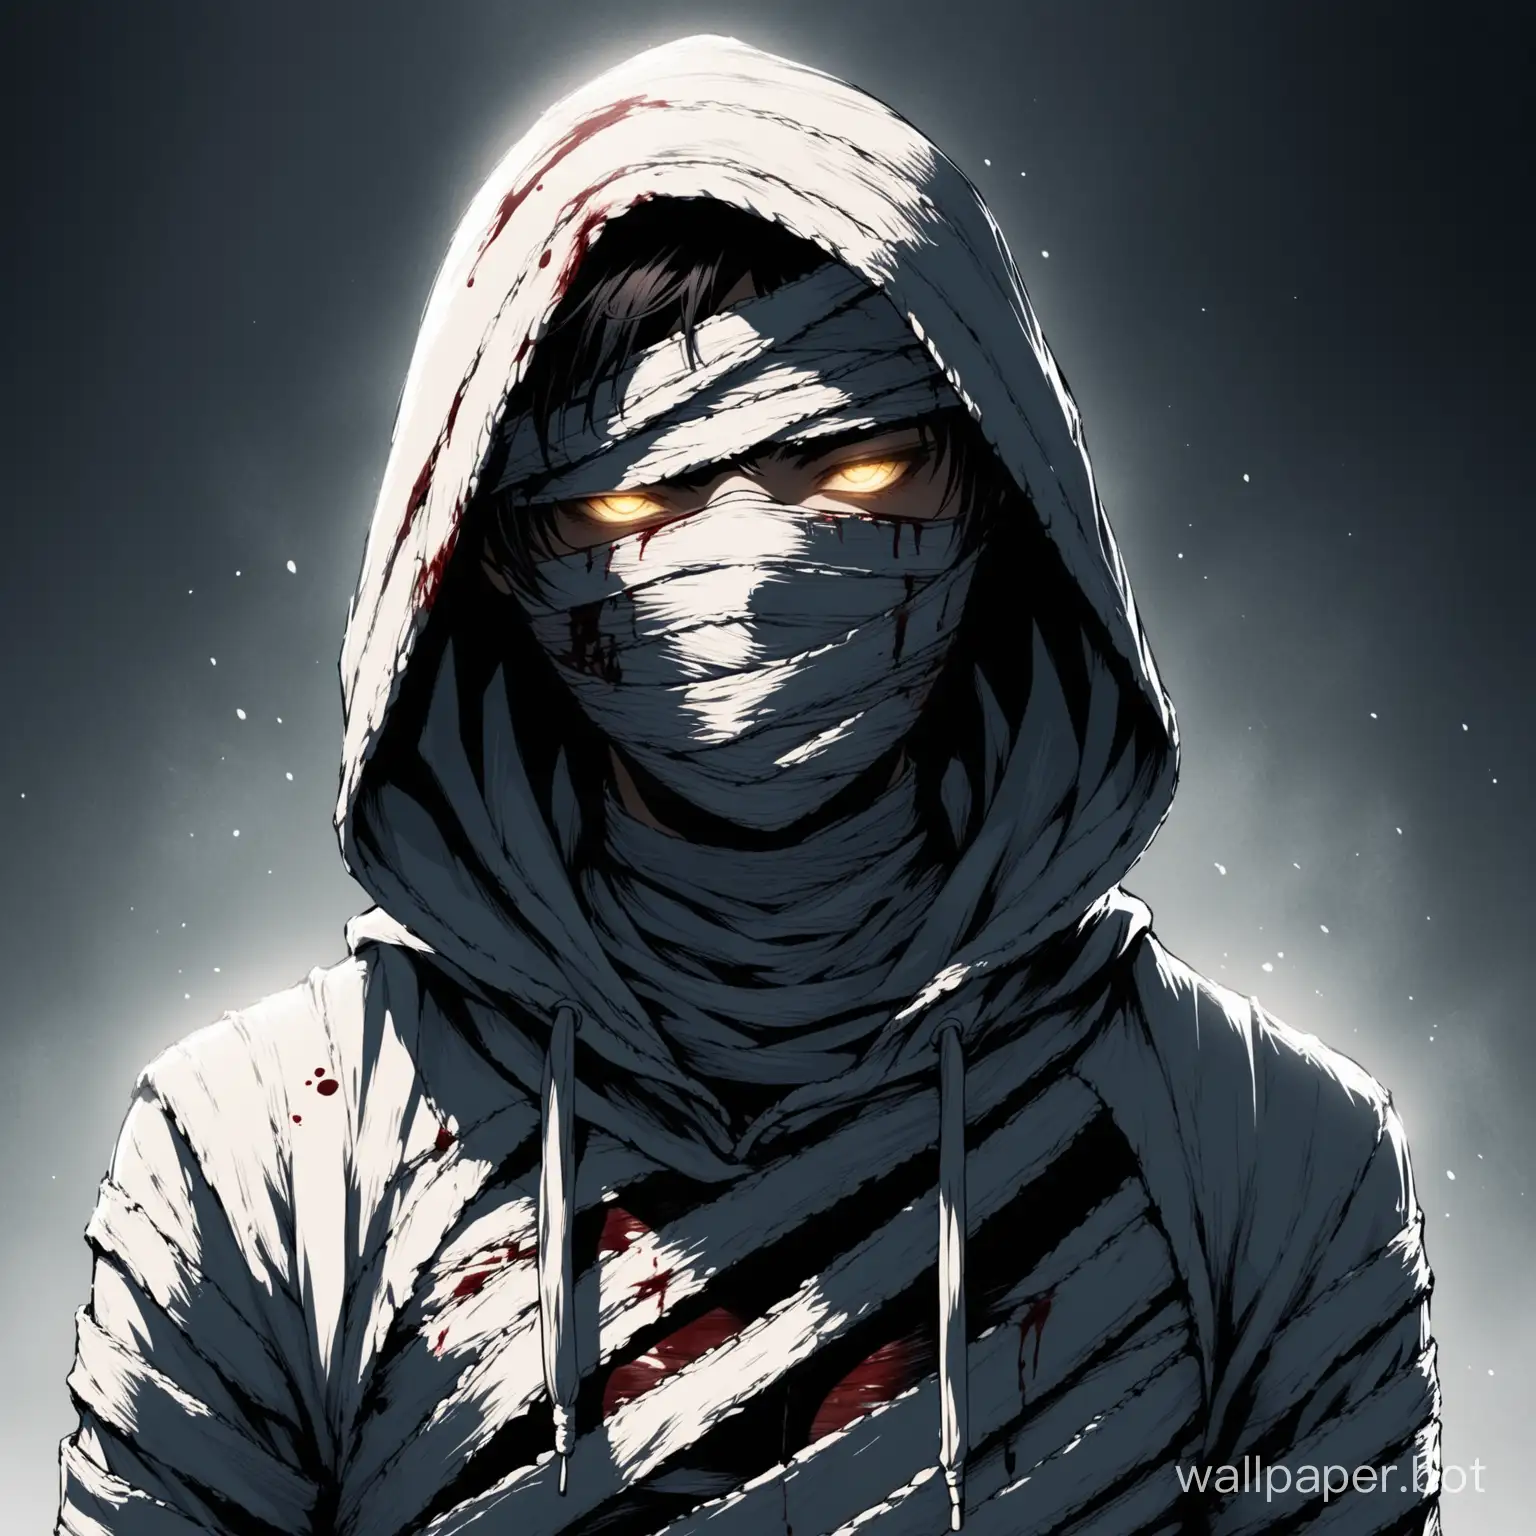 a  hoodie teen only his mouth cover in mask his body have many bandages just like a mummy also the part of his have a blood and fierce aura